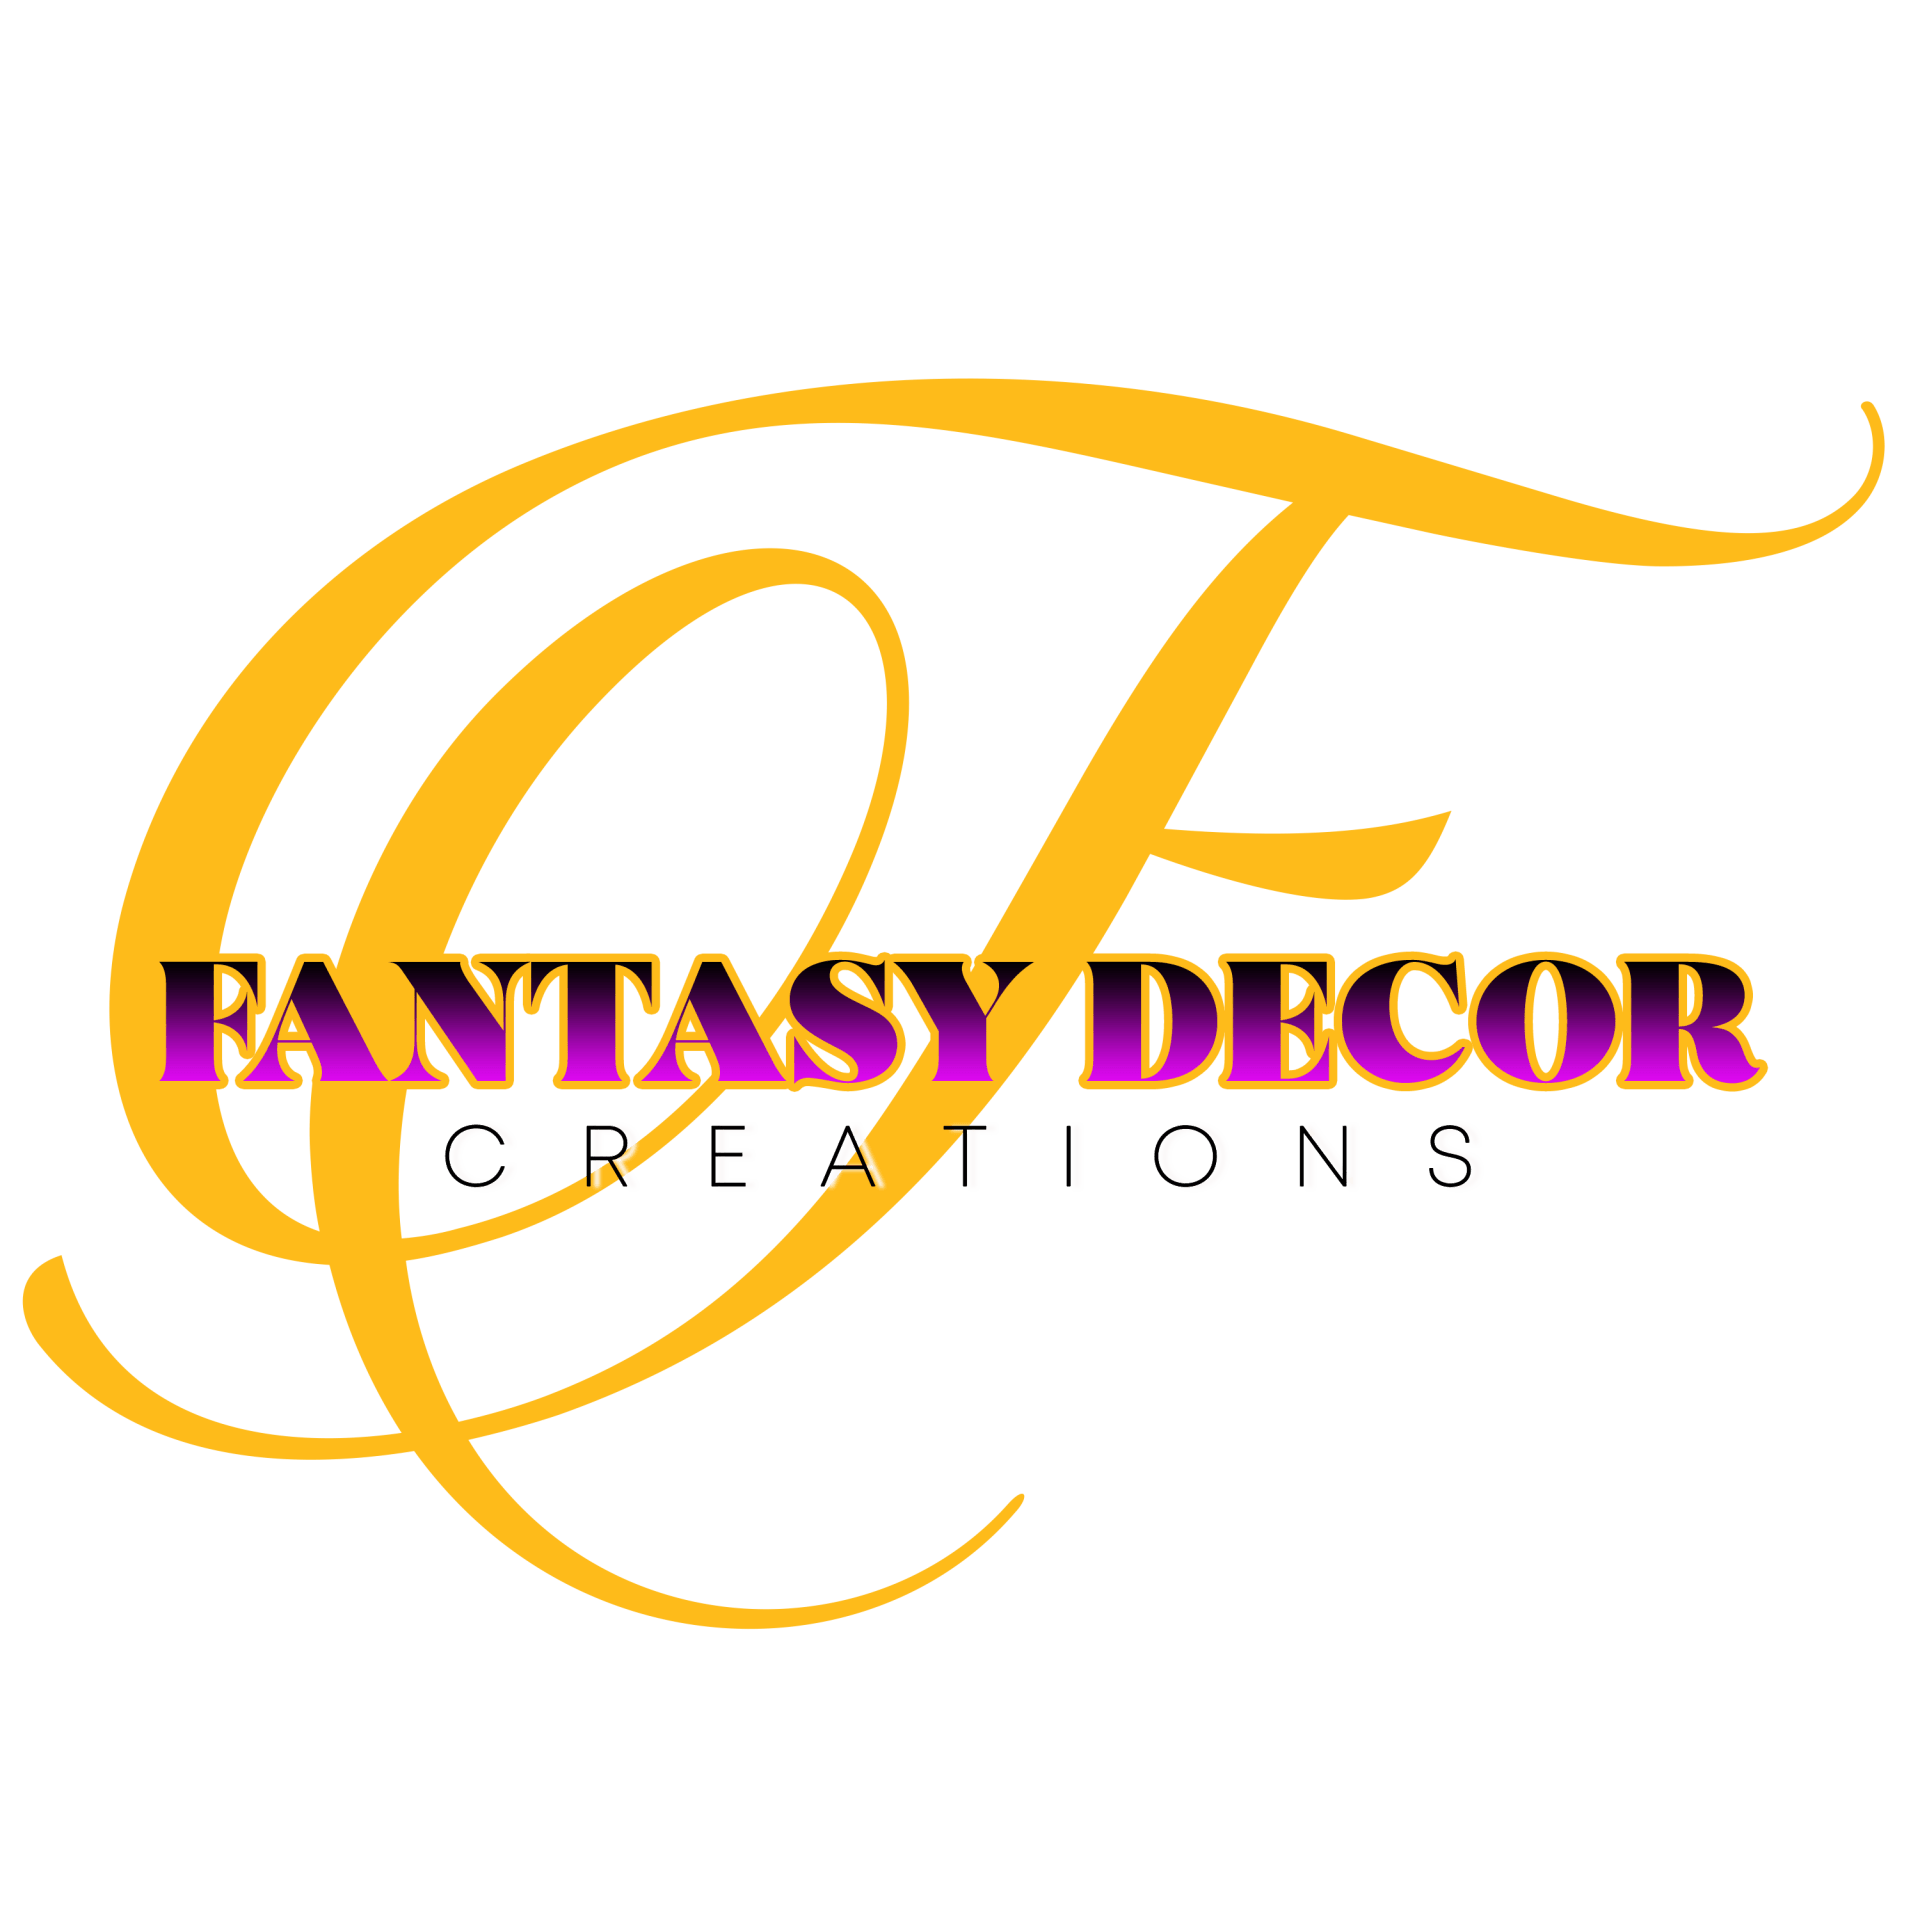 Fantasy Decor Creations – Let's decorate your Event in style